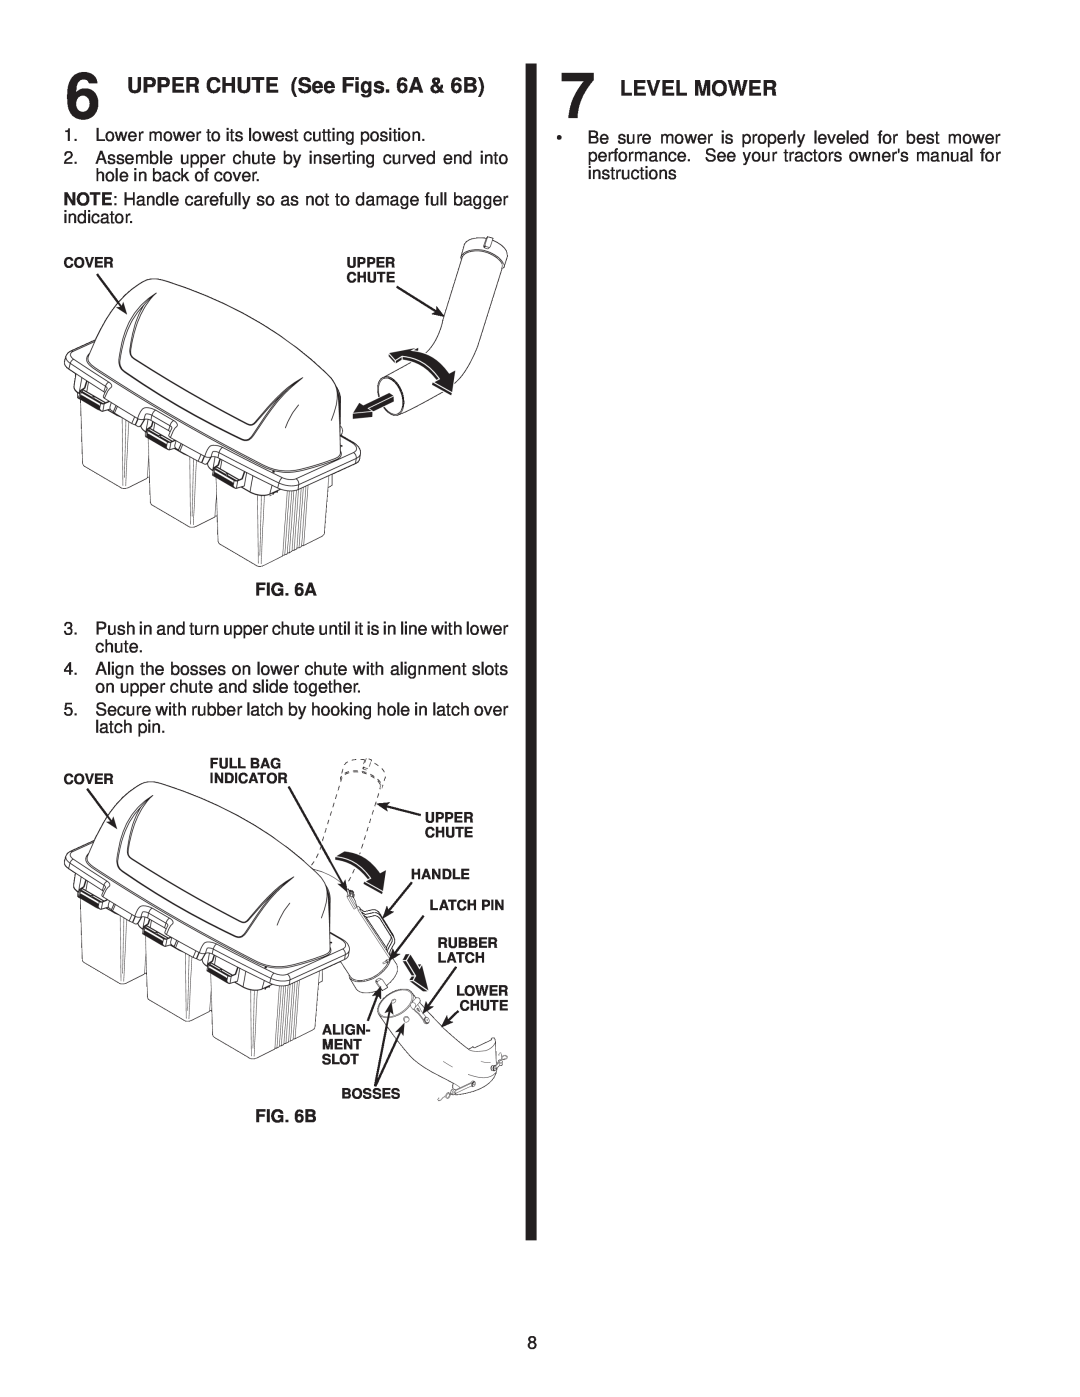 McCulloch 960 71 00-23, H338HL, 96071002300 owner manual UPPER CHUTE See Figs. 6A & 6B, Level Mower 